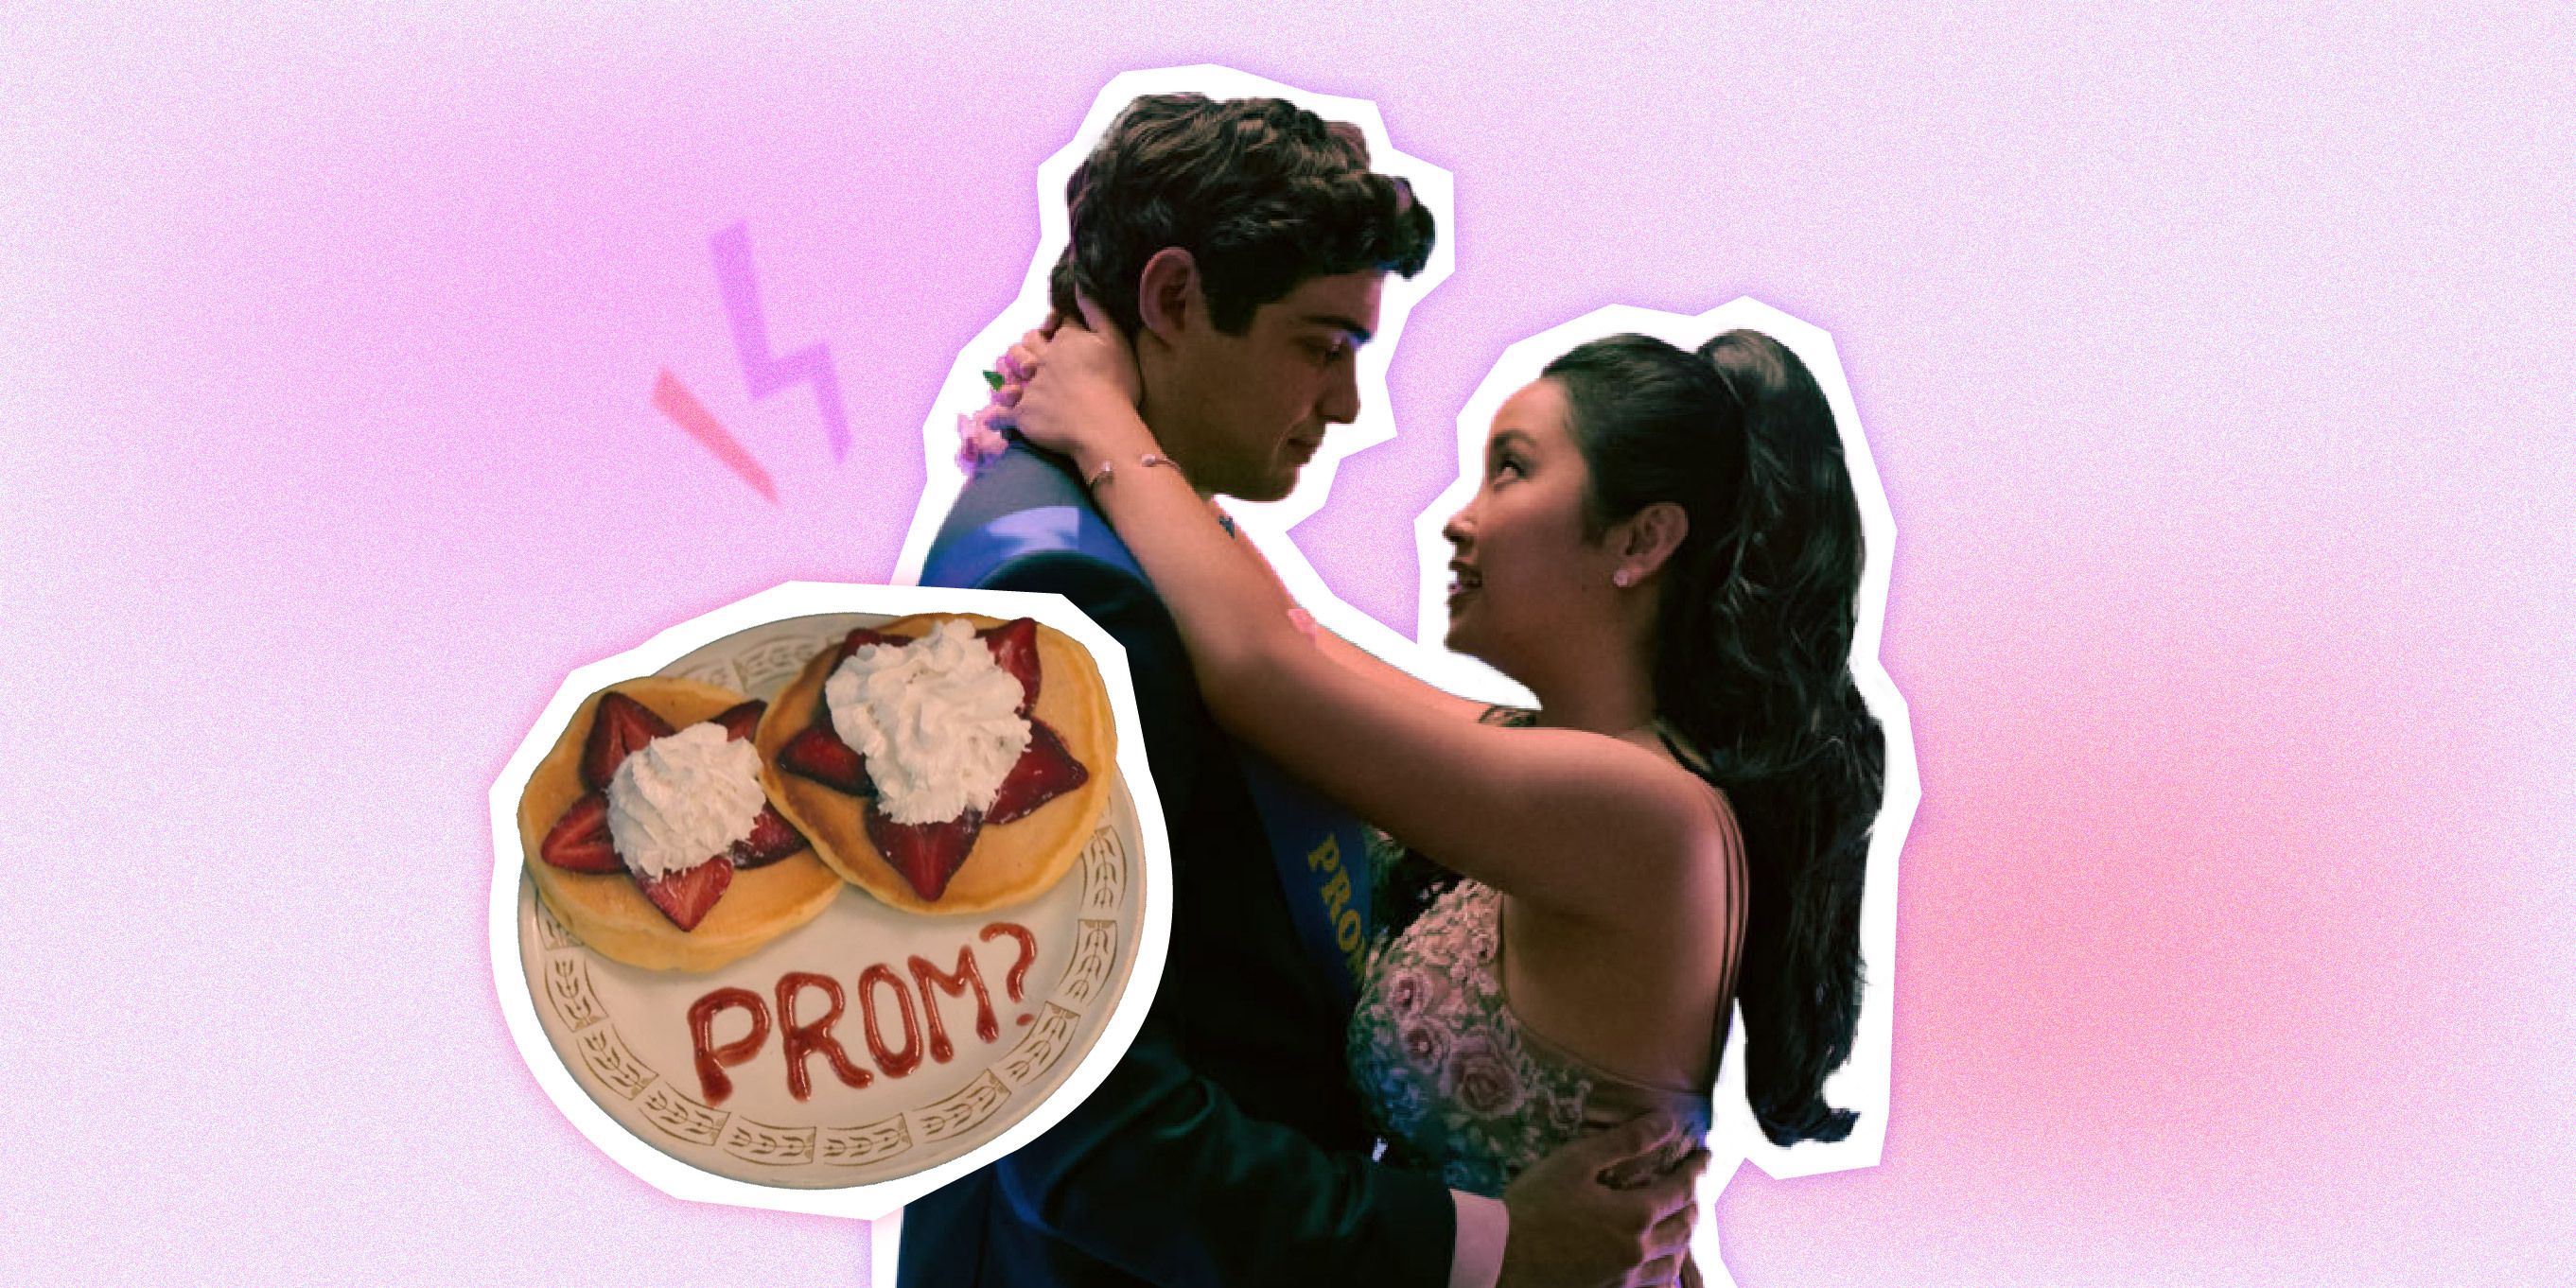 will you go to prom with me poster ideas